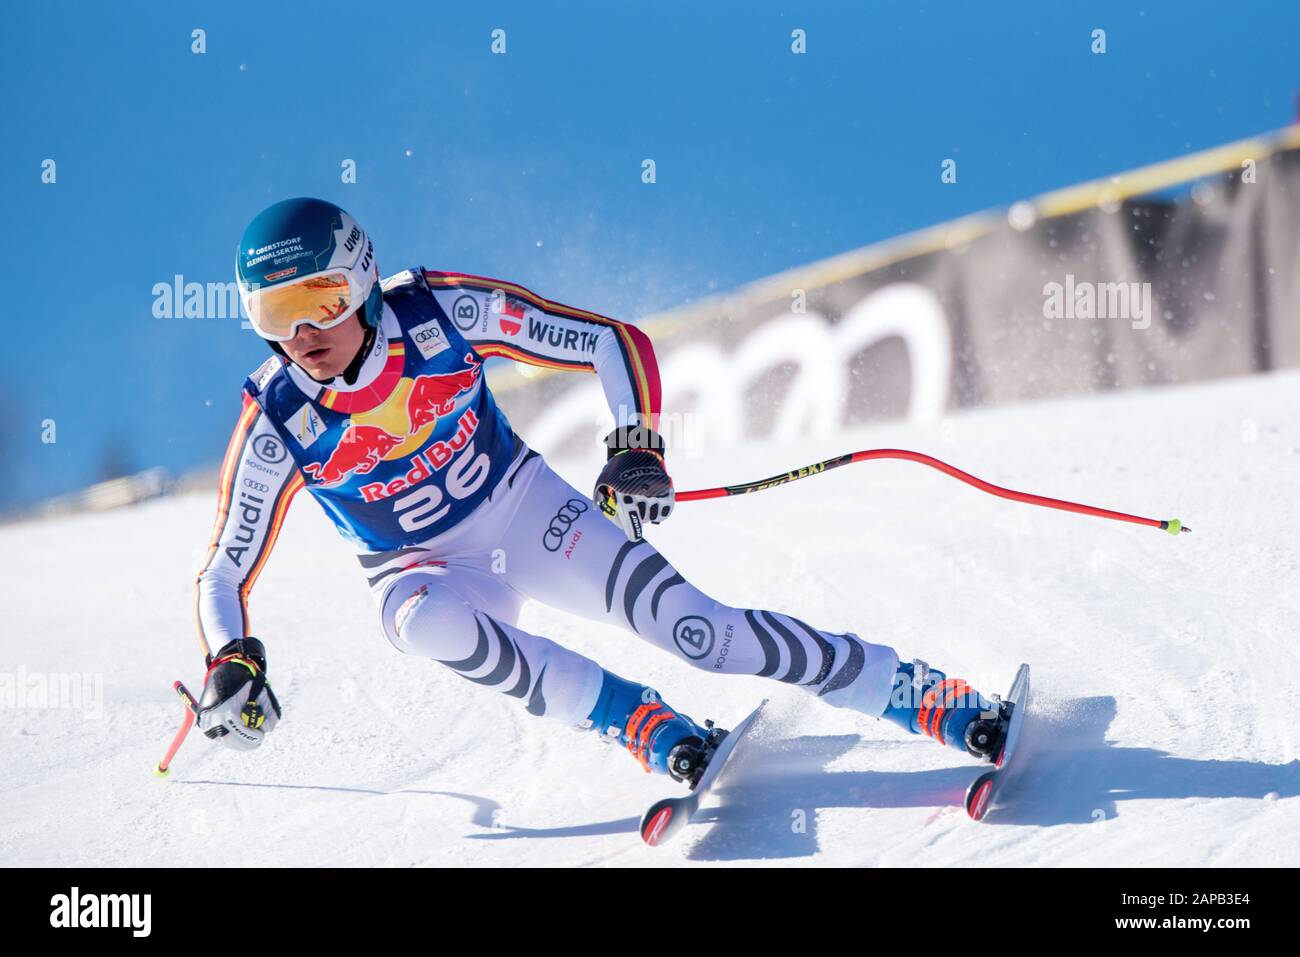 Manuel Schmid of Germany at the Ski Alpin: 80. Hahnenkamm Race 2020 - Audi FIS Alpine Ski World Cup - Men's Downhill Training at the Streif on January 22, 2020 in Kitzbuehel, AUSTRIA. (Photo by Horst Ettensberger/ESPA-Images) Stock Photo